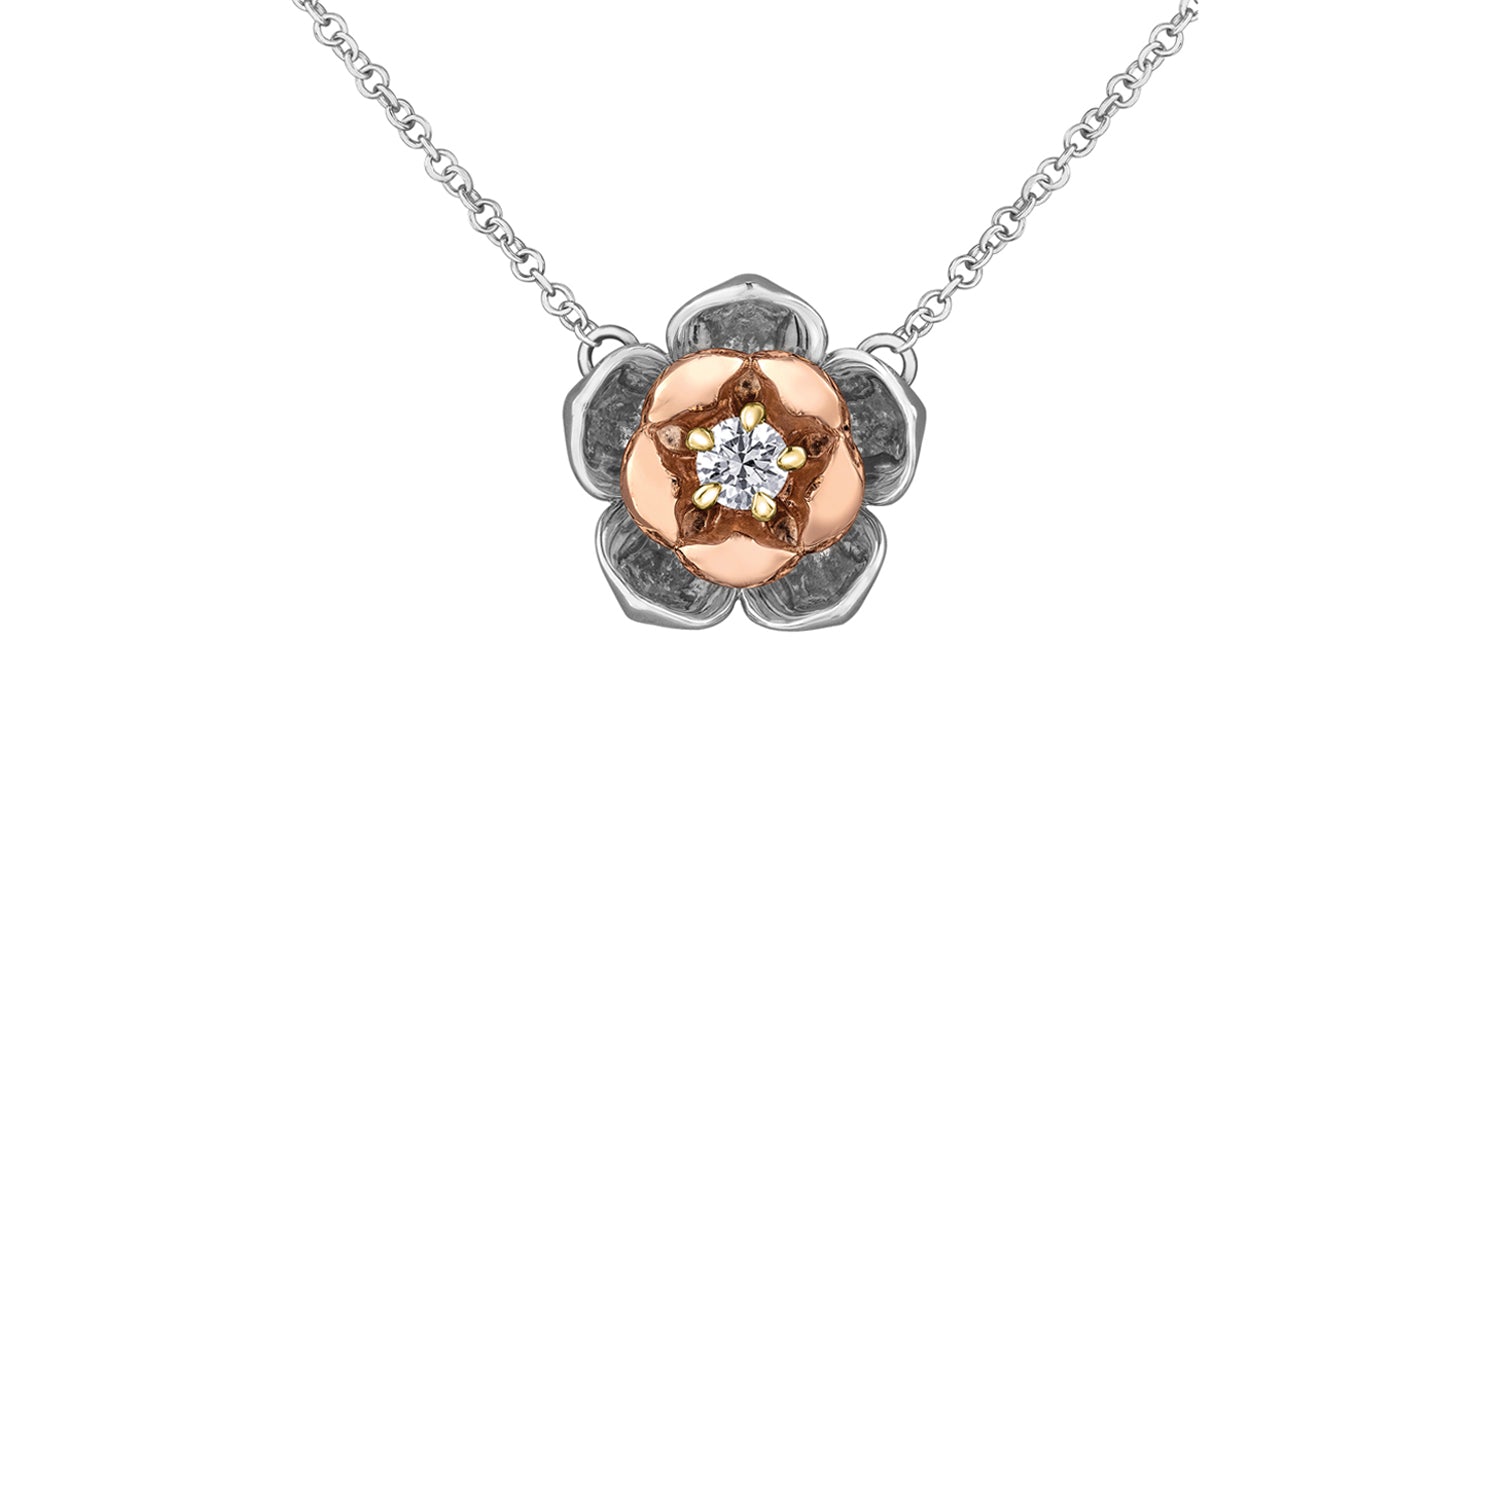 Crafted in 14KT rose and white Certified Canadian Gold, this necklace features a Newfoundland & Labrador pitcher plant flower set with a round brilliant-cut Canadian diamond